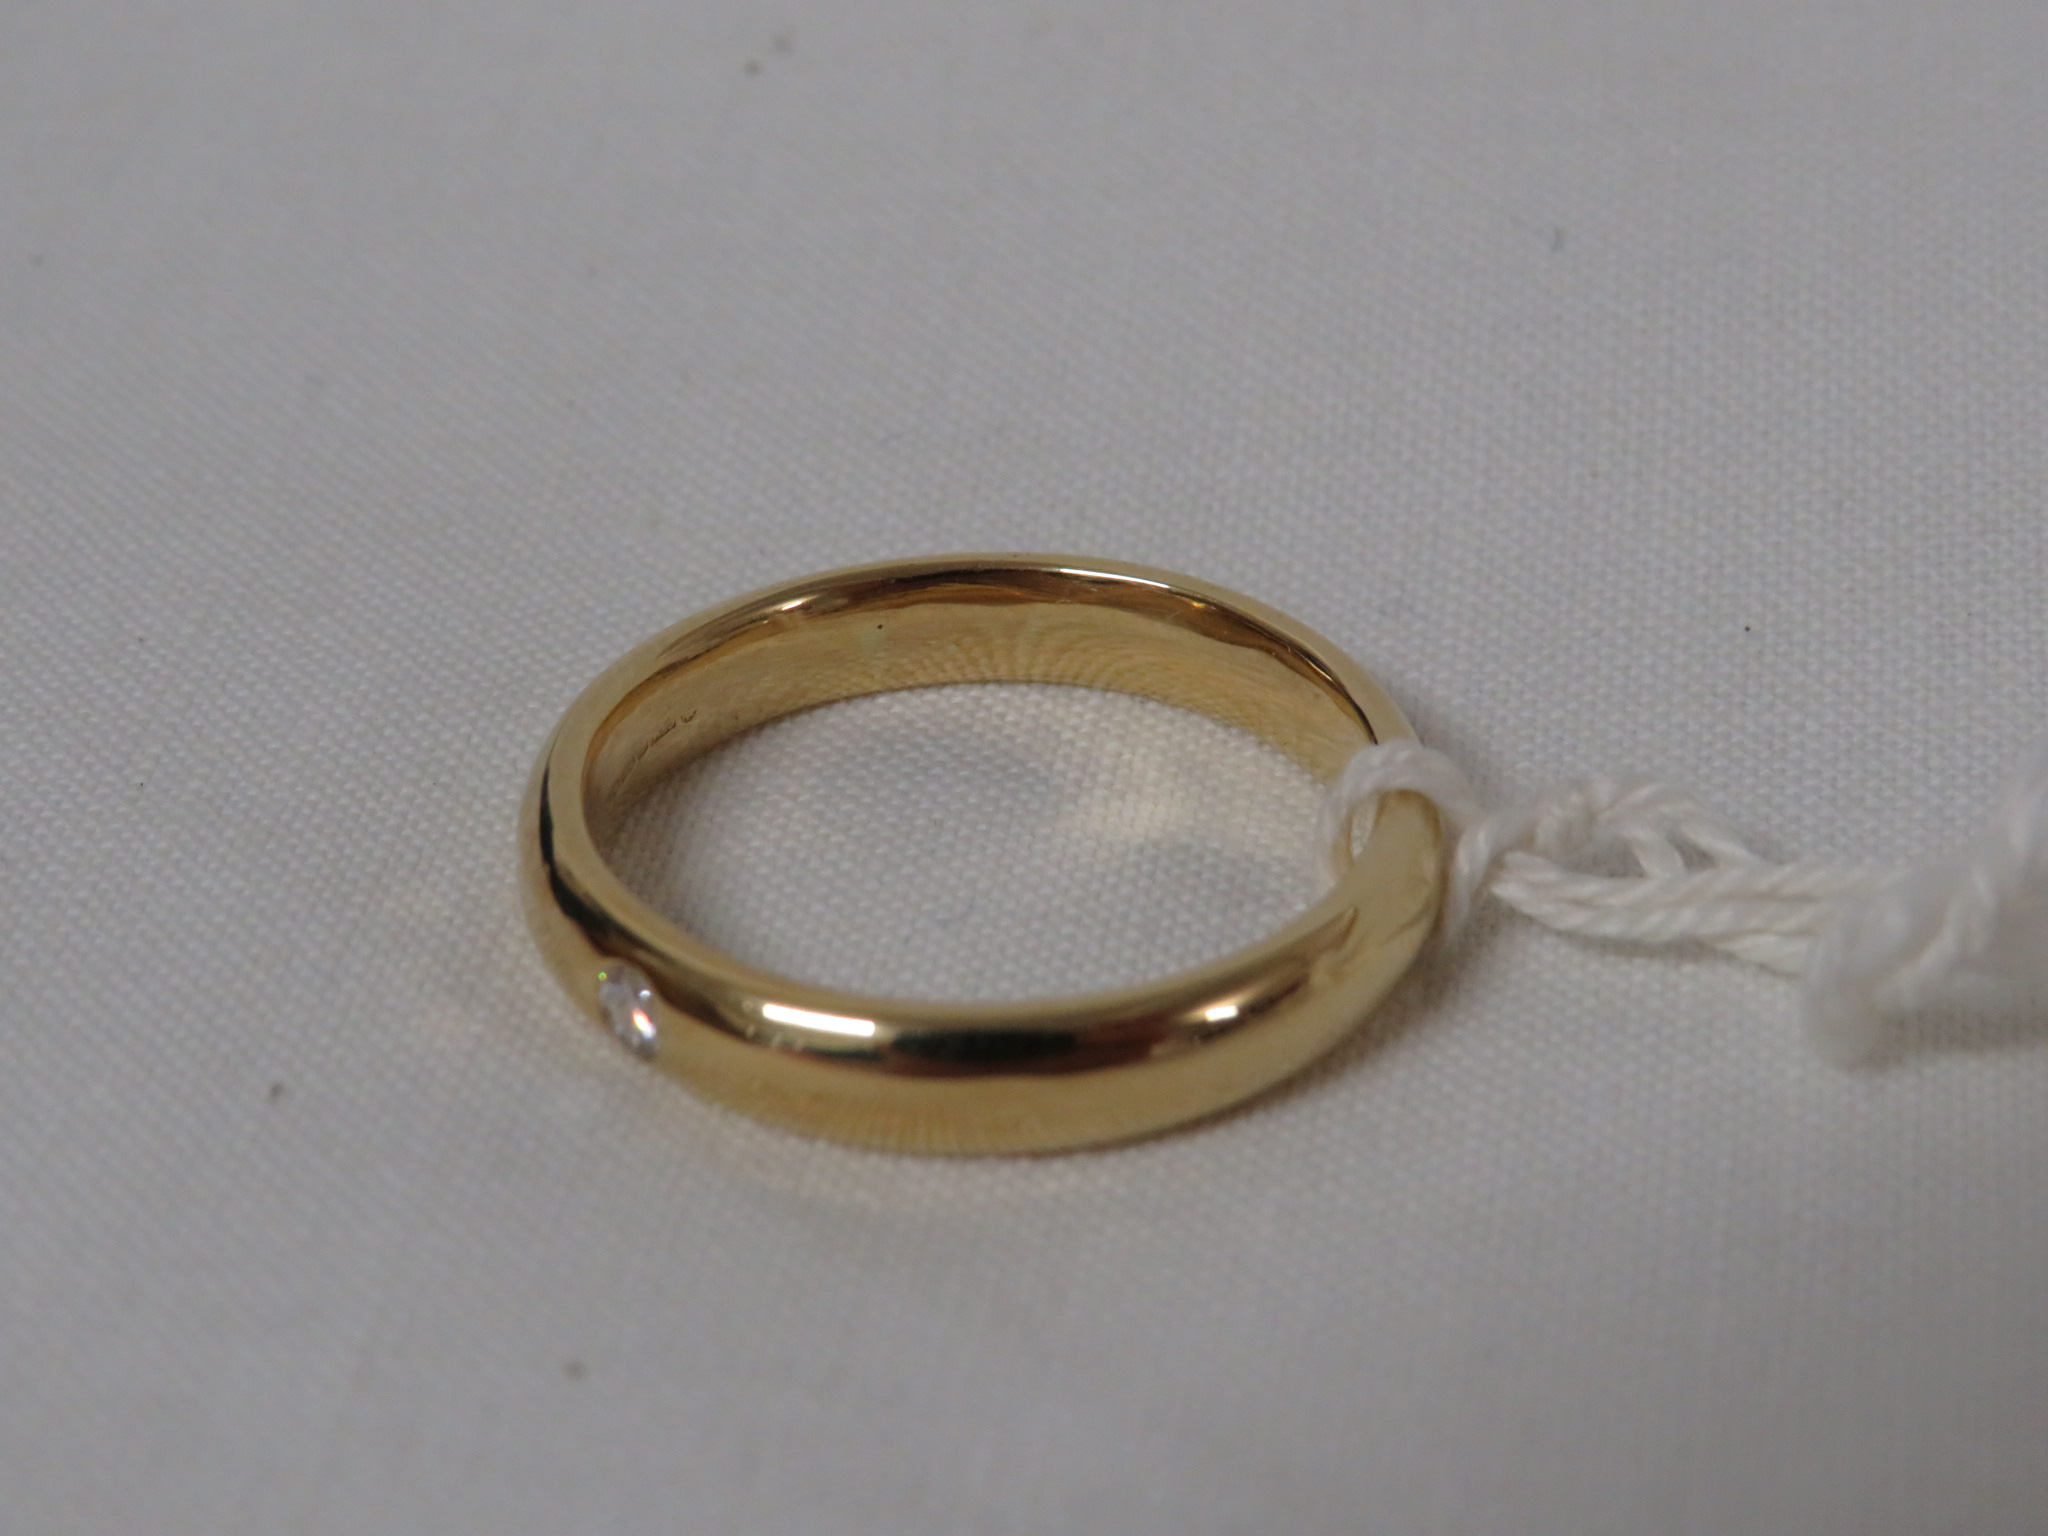 18 CARAT GOLD WEDDING BAND SET WITH SMALL WHITE STONE, 7.3G, IN PRESENTATION BOX. - Image 3 of 3